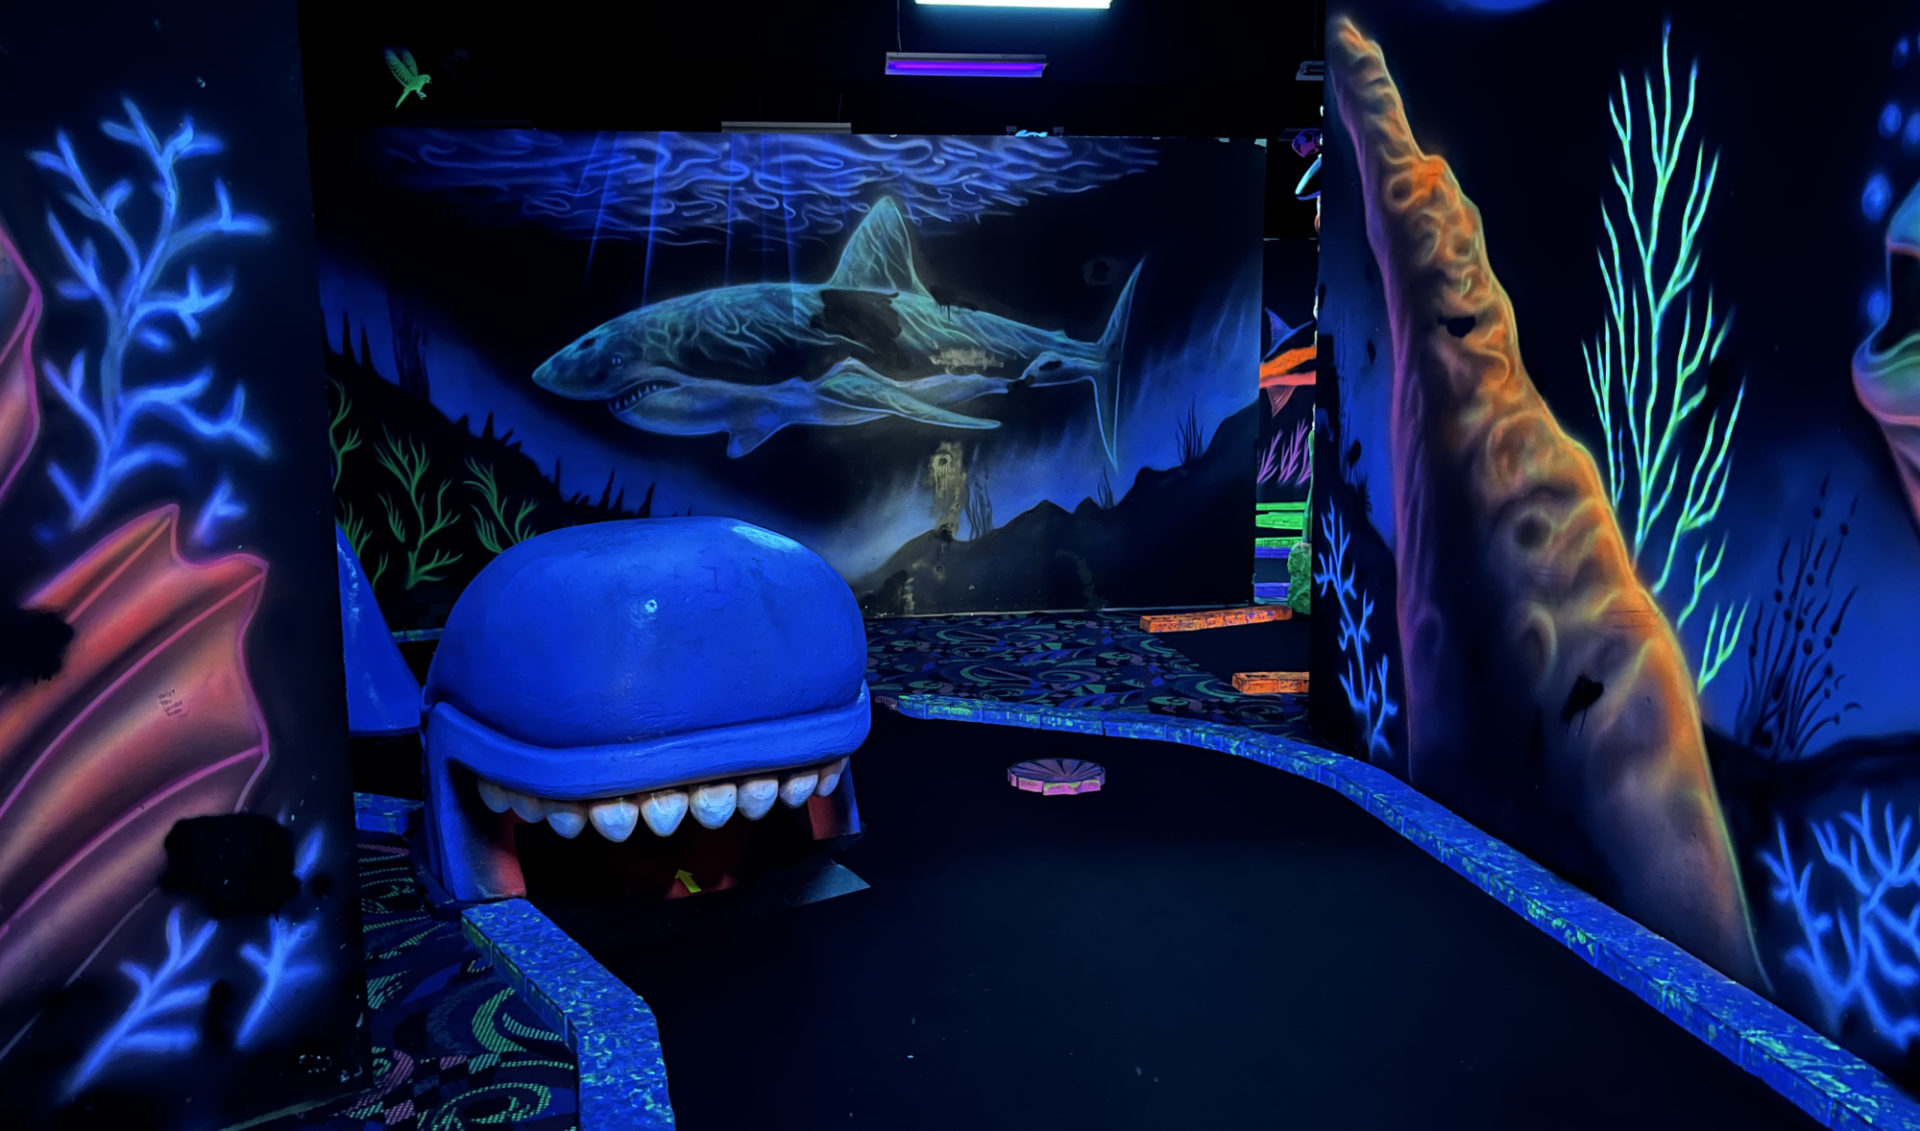 View of first hole of black light mini golf at Arrowhead Lanes. A black light-lit space shows under-the-sea murals on the walls featuring sea plants and sharks and fish. The mini golf hole features a sperm whale through which you are intended to hit the gold ball.